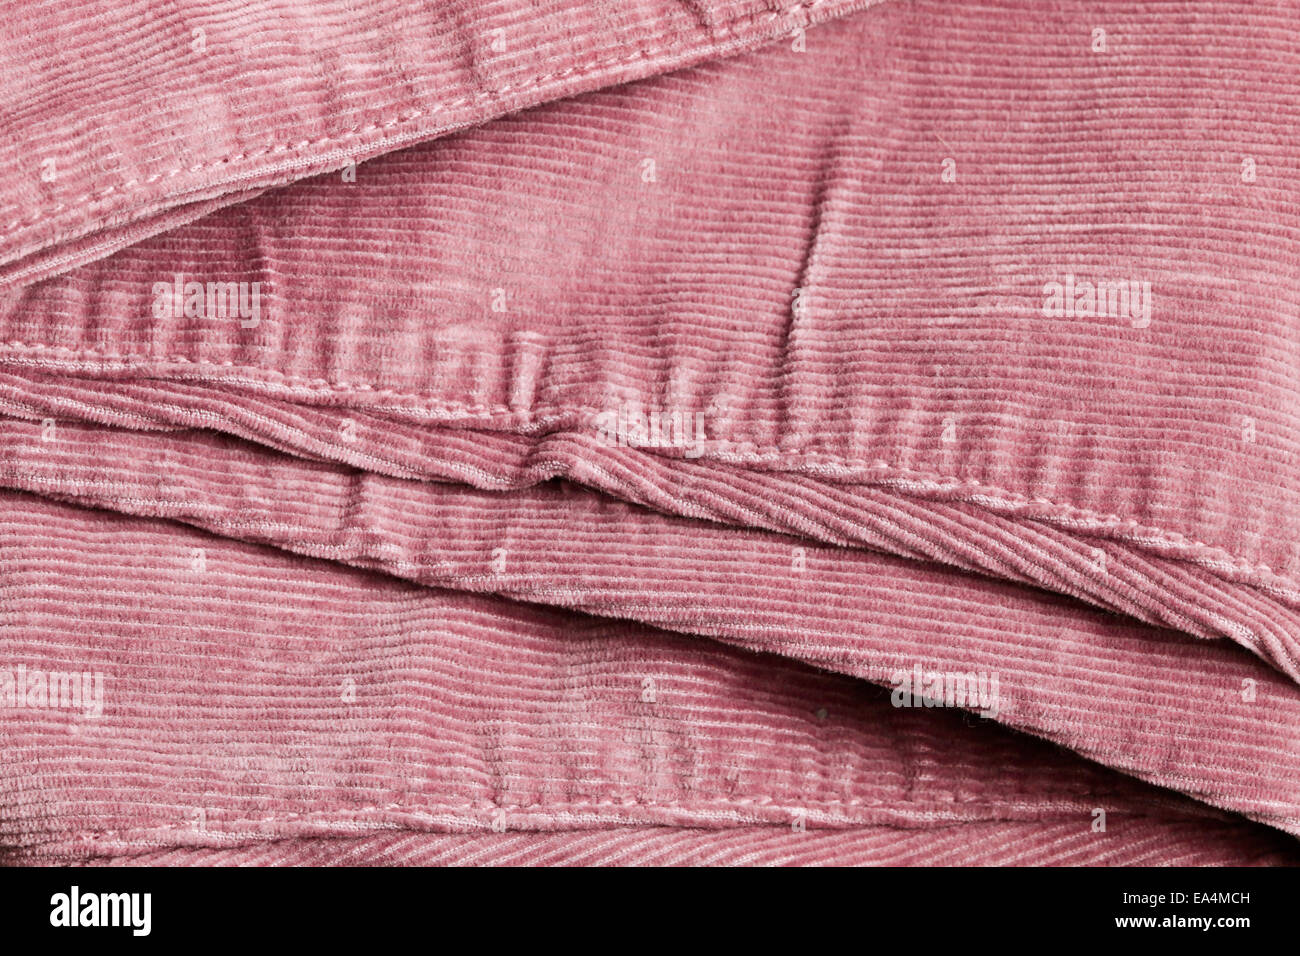 Close up of the seam on pink corduroy trousers Stock Photo